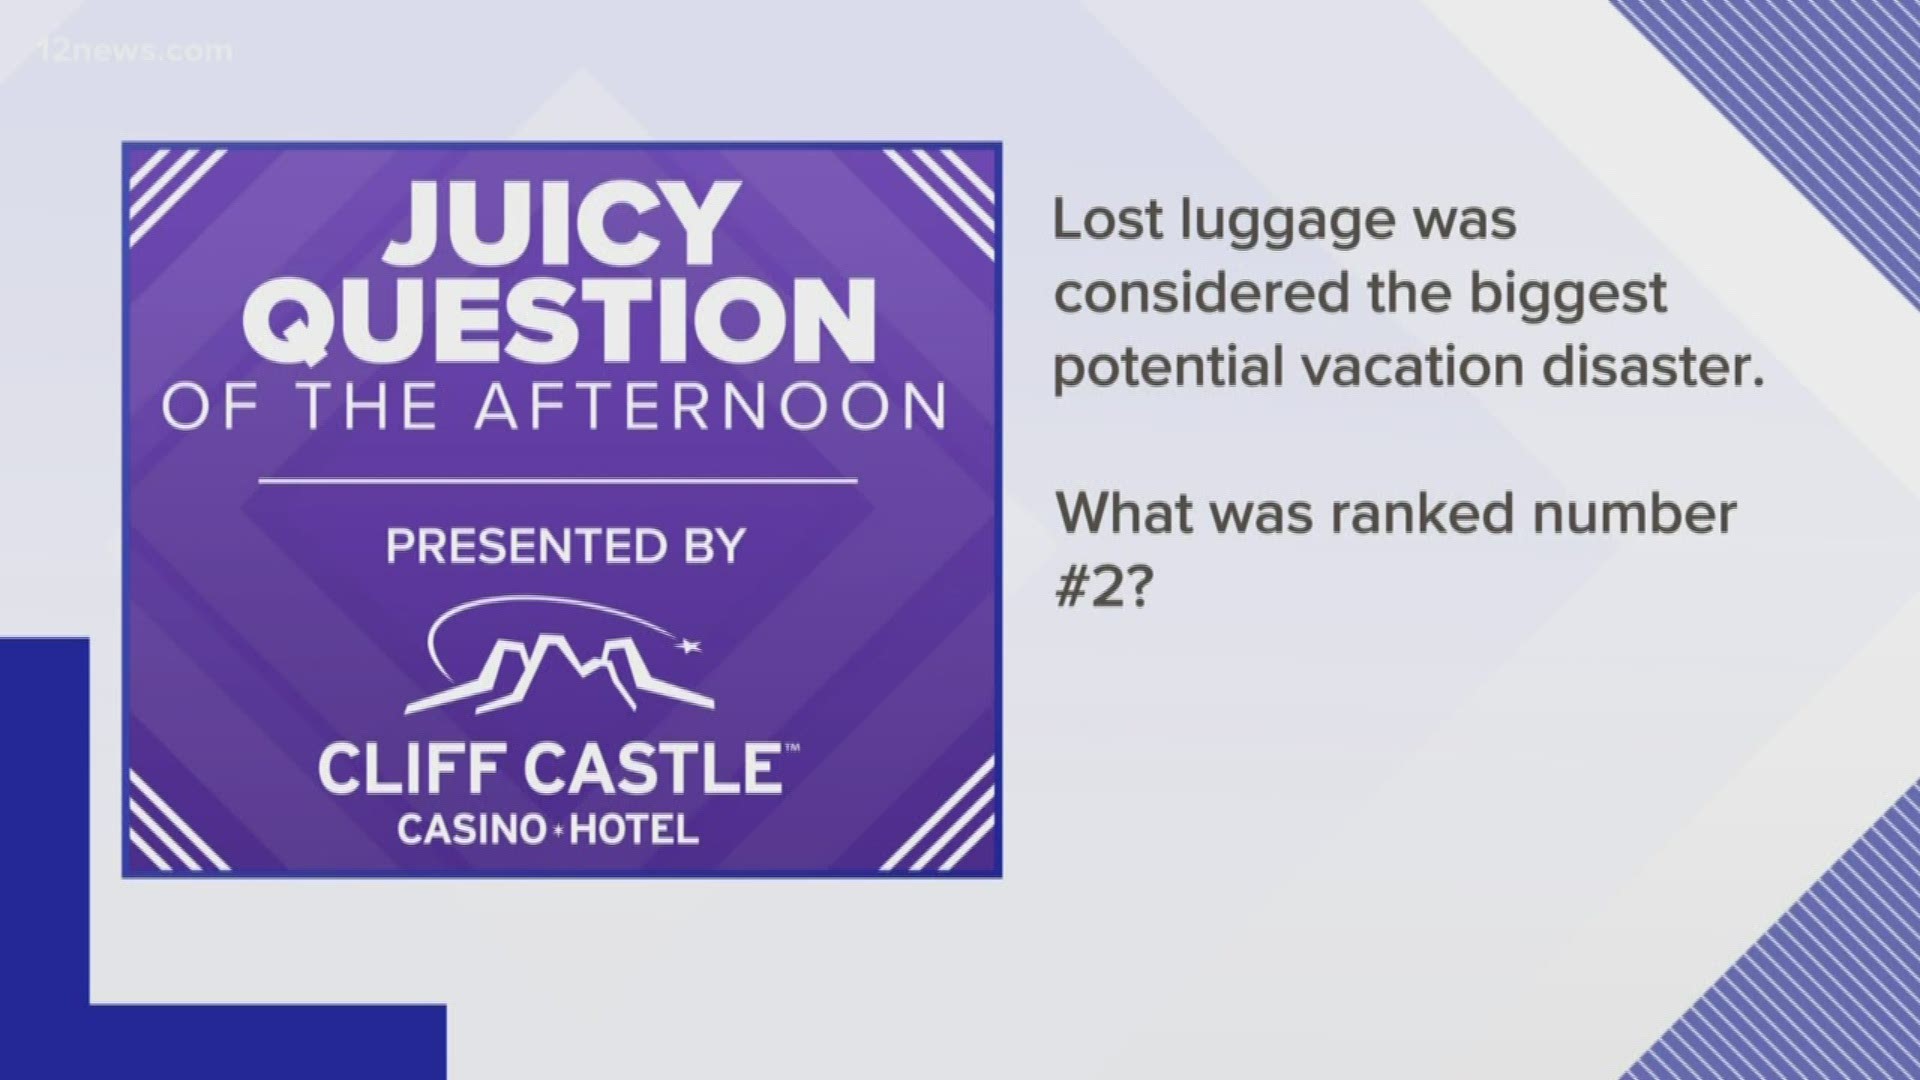 Lost luggage was considered the biggest potential vacation disaster. THIS was ranked number #2. What is it?